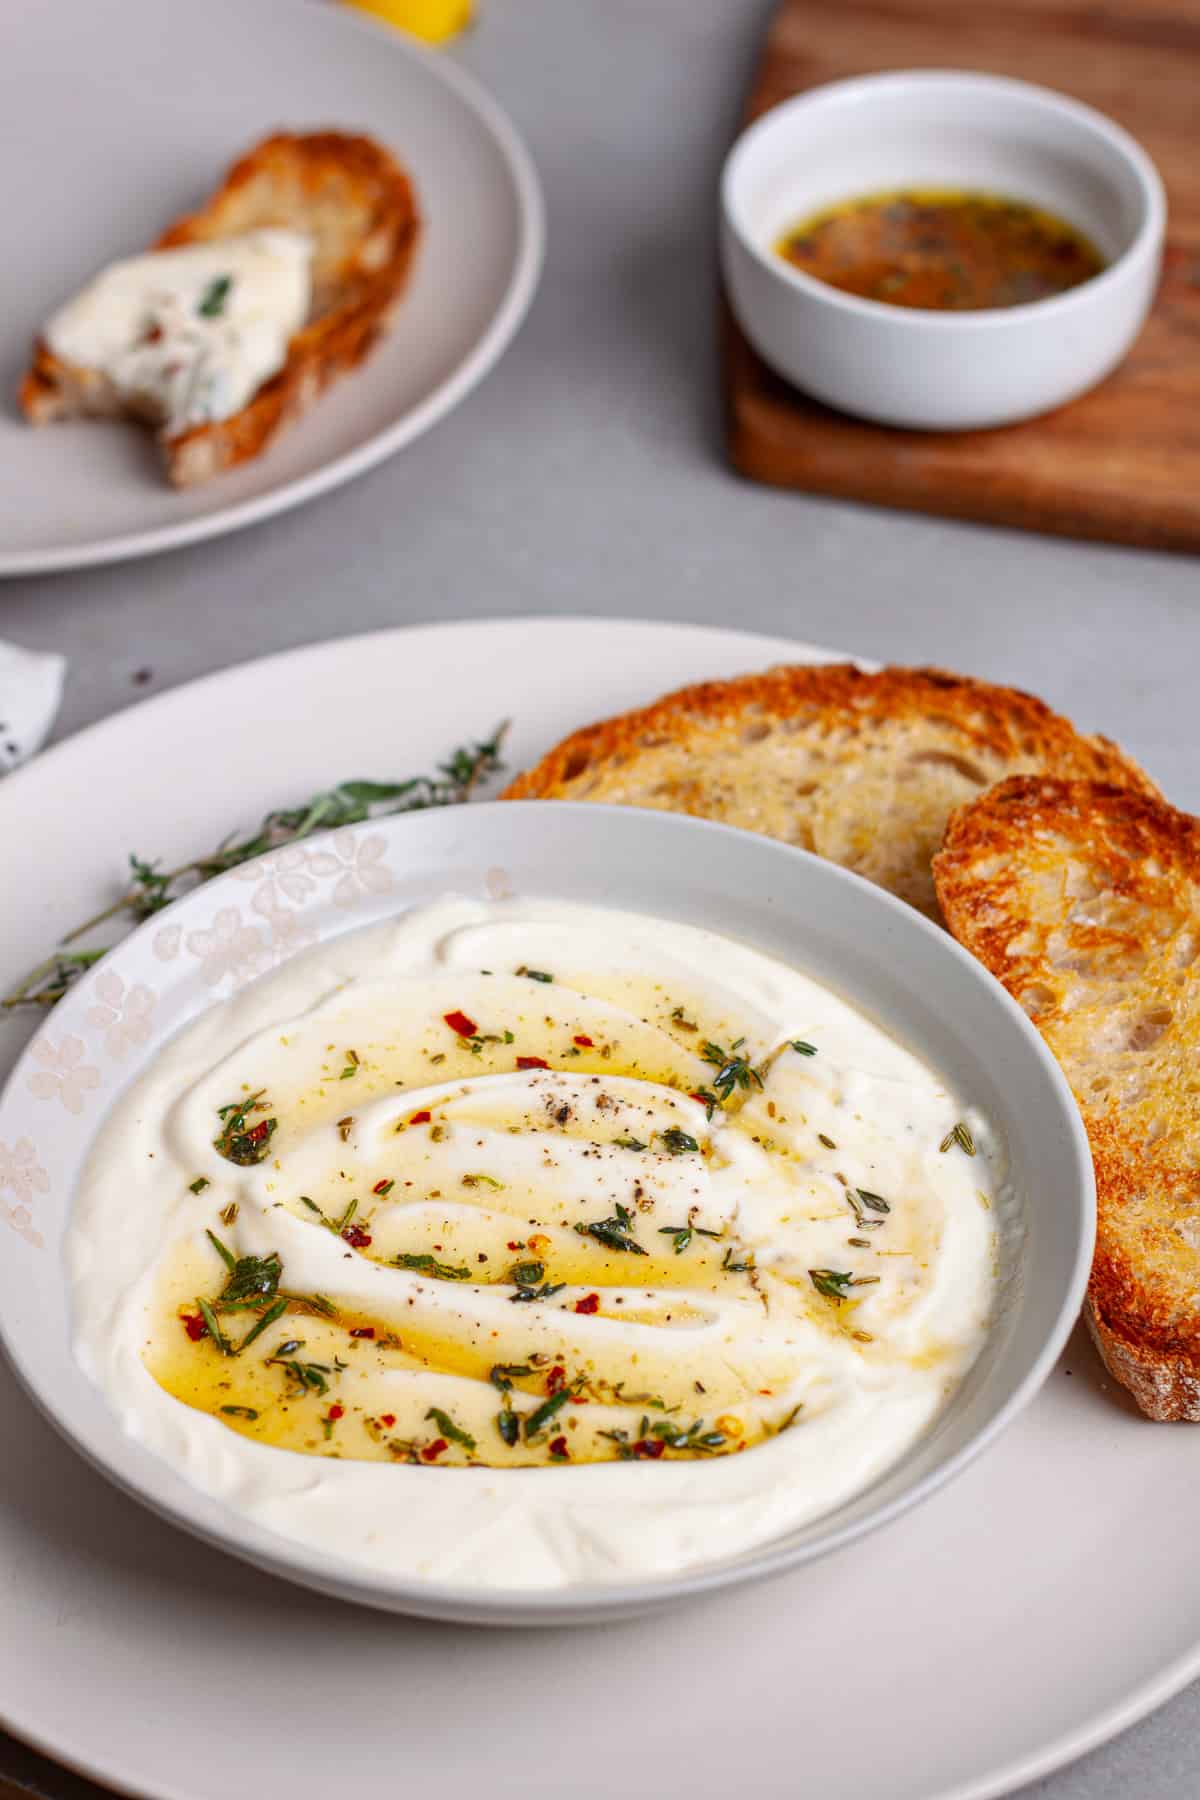 A serving bowl of whipped ricotta dip topped with honey and herbs on a plate with toasted bread.